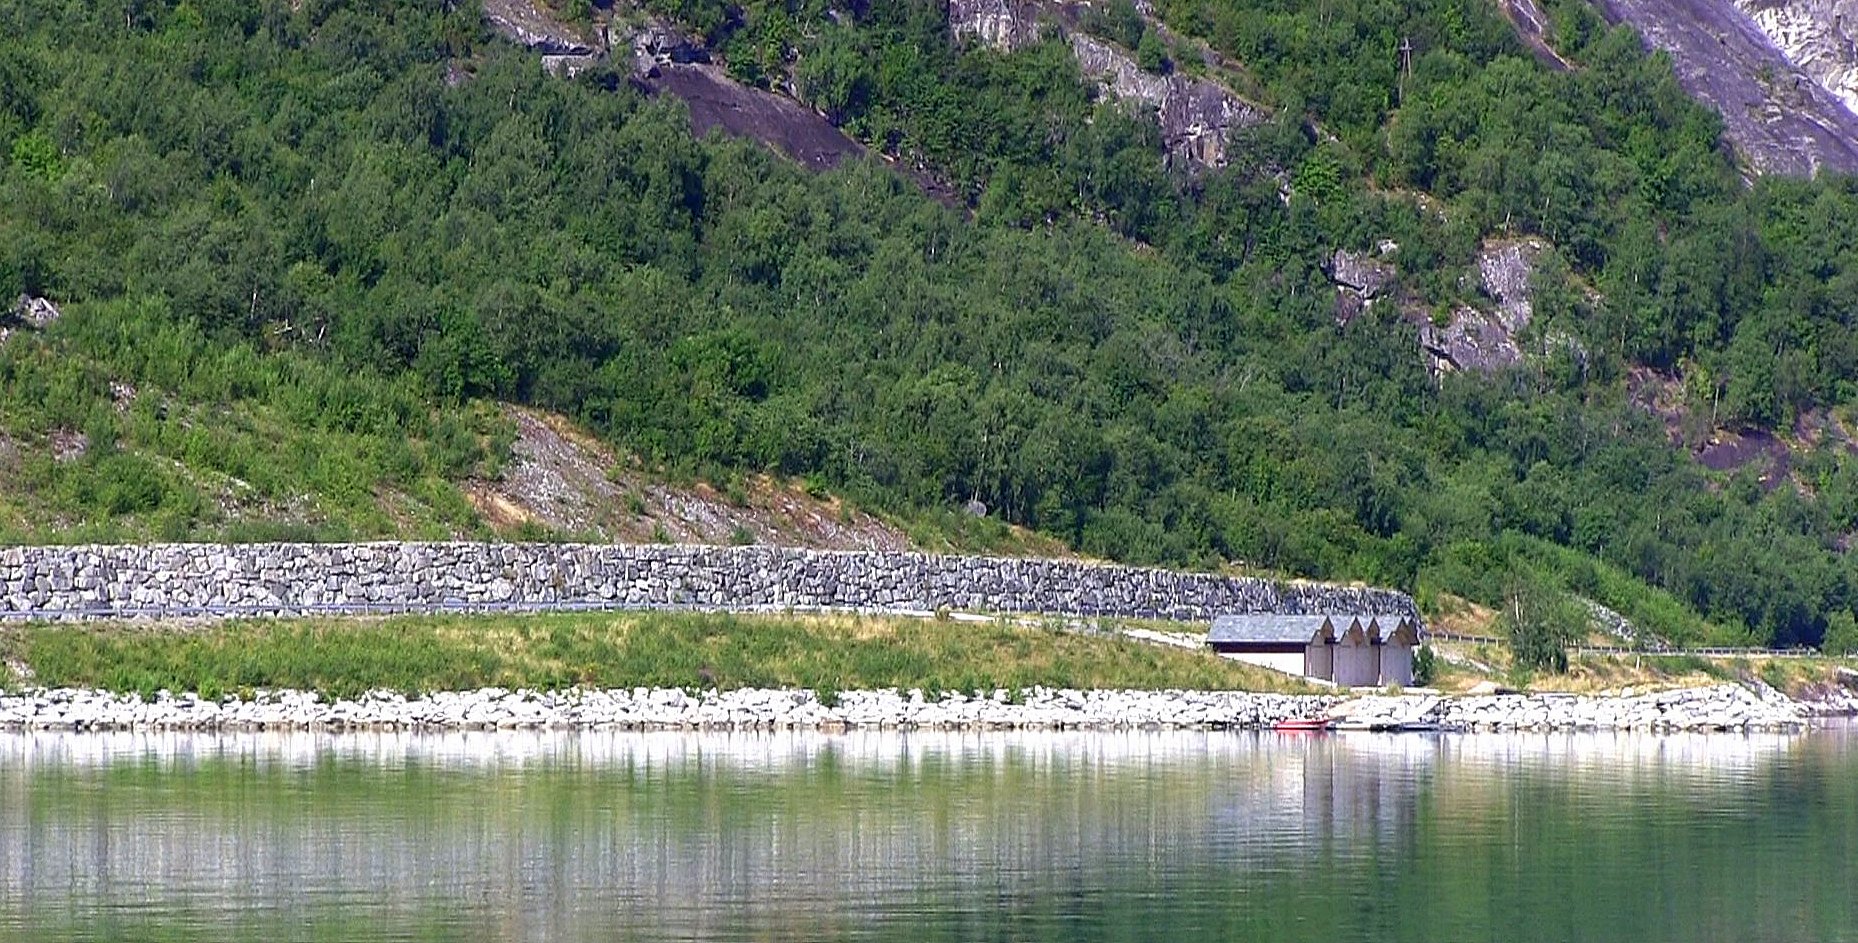 Avalanche barrier and boathouse in Menes. © Anne Gullbjørg Digranes